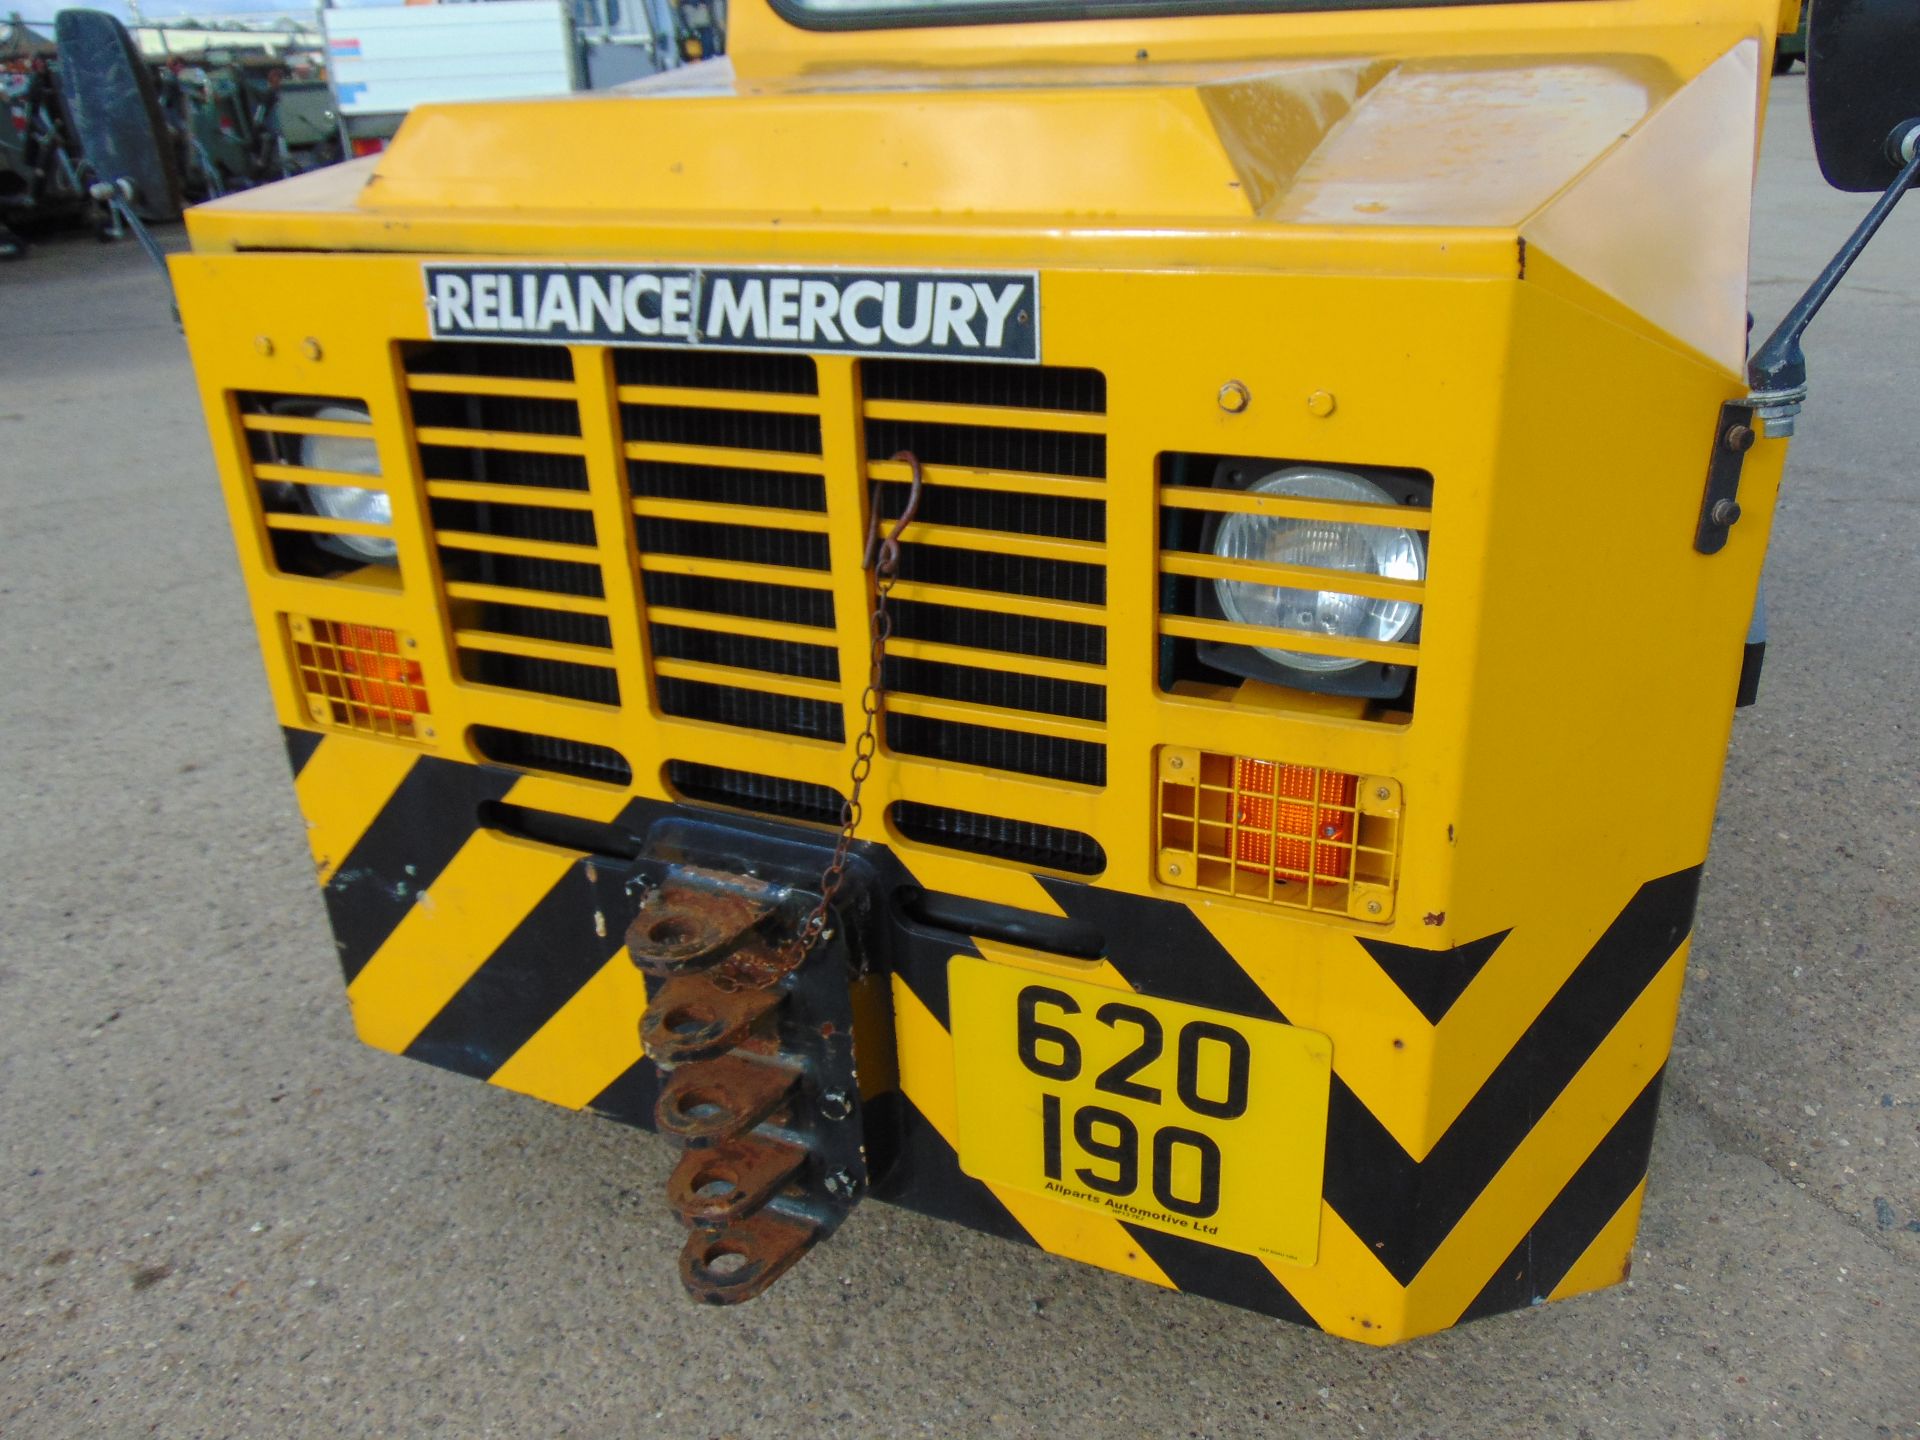 Reliance Mercury 403 Industrial Aircraft - Airport Tug/Towing Tractor - Image 8 of 18